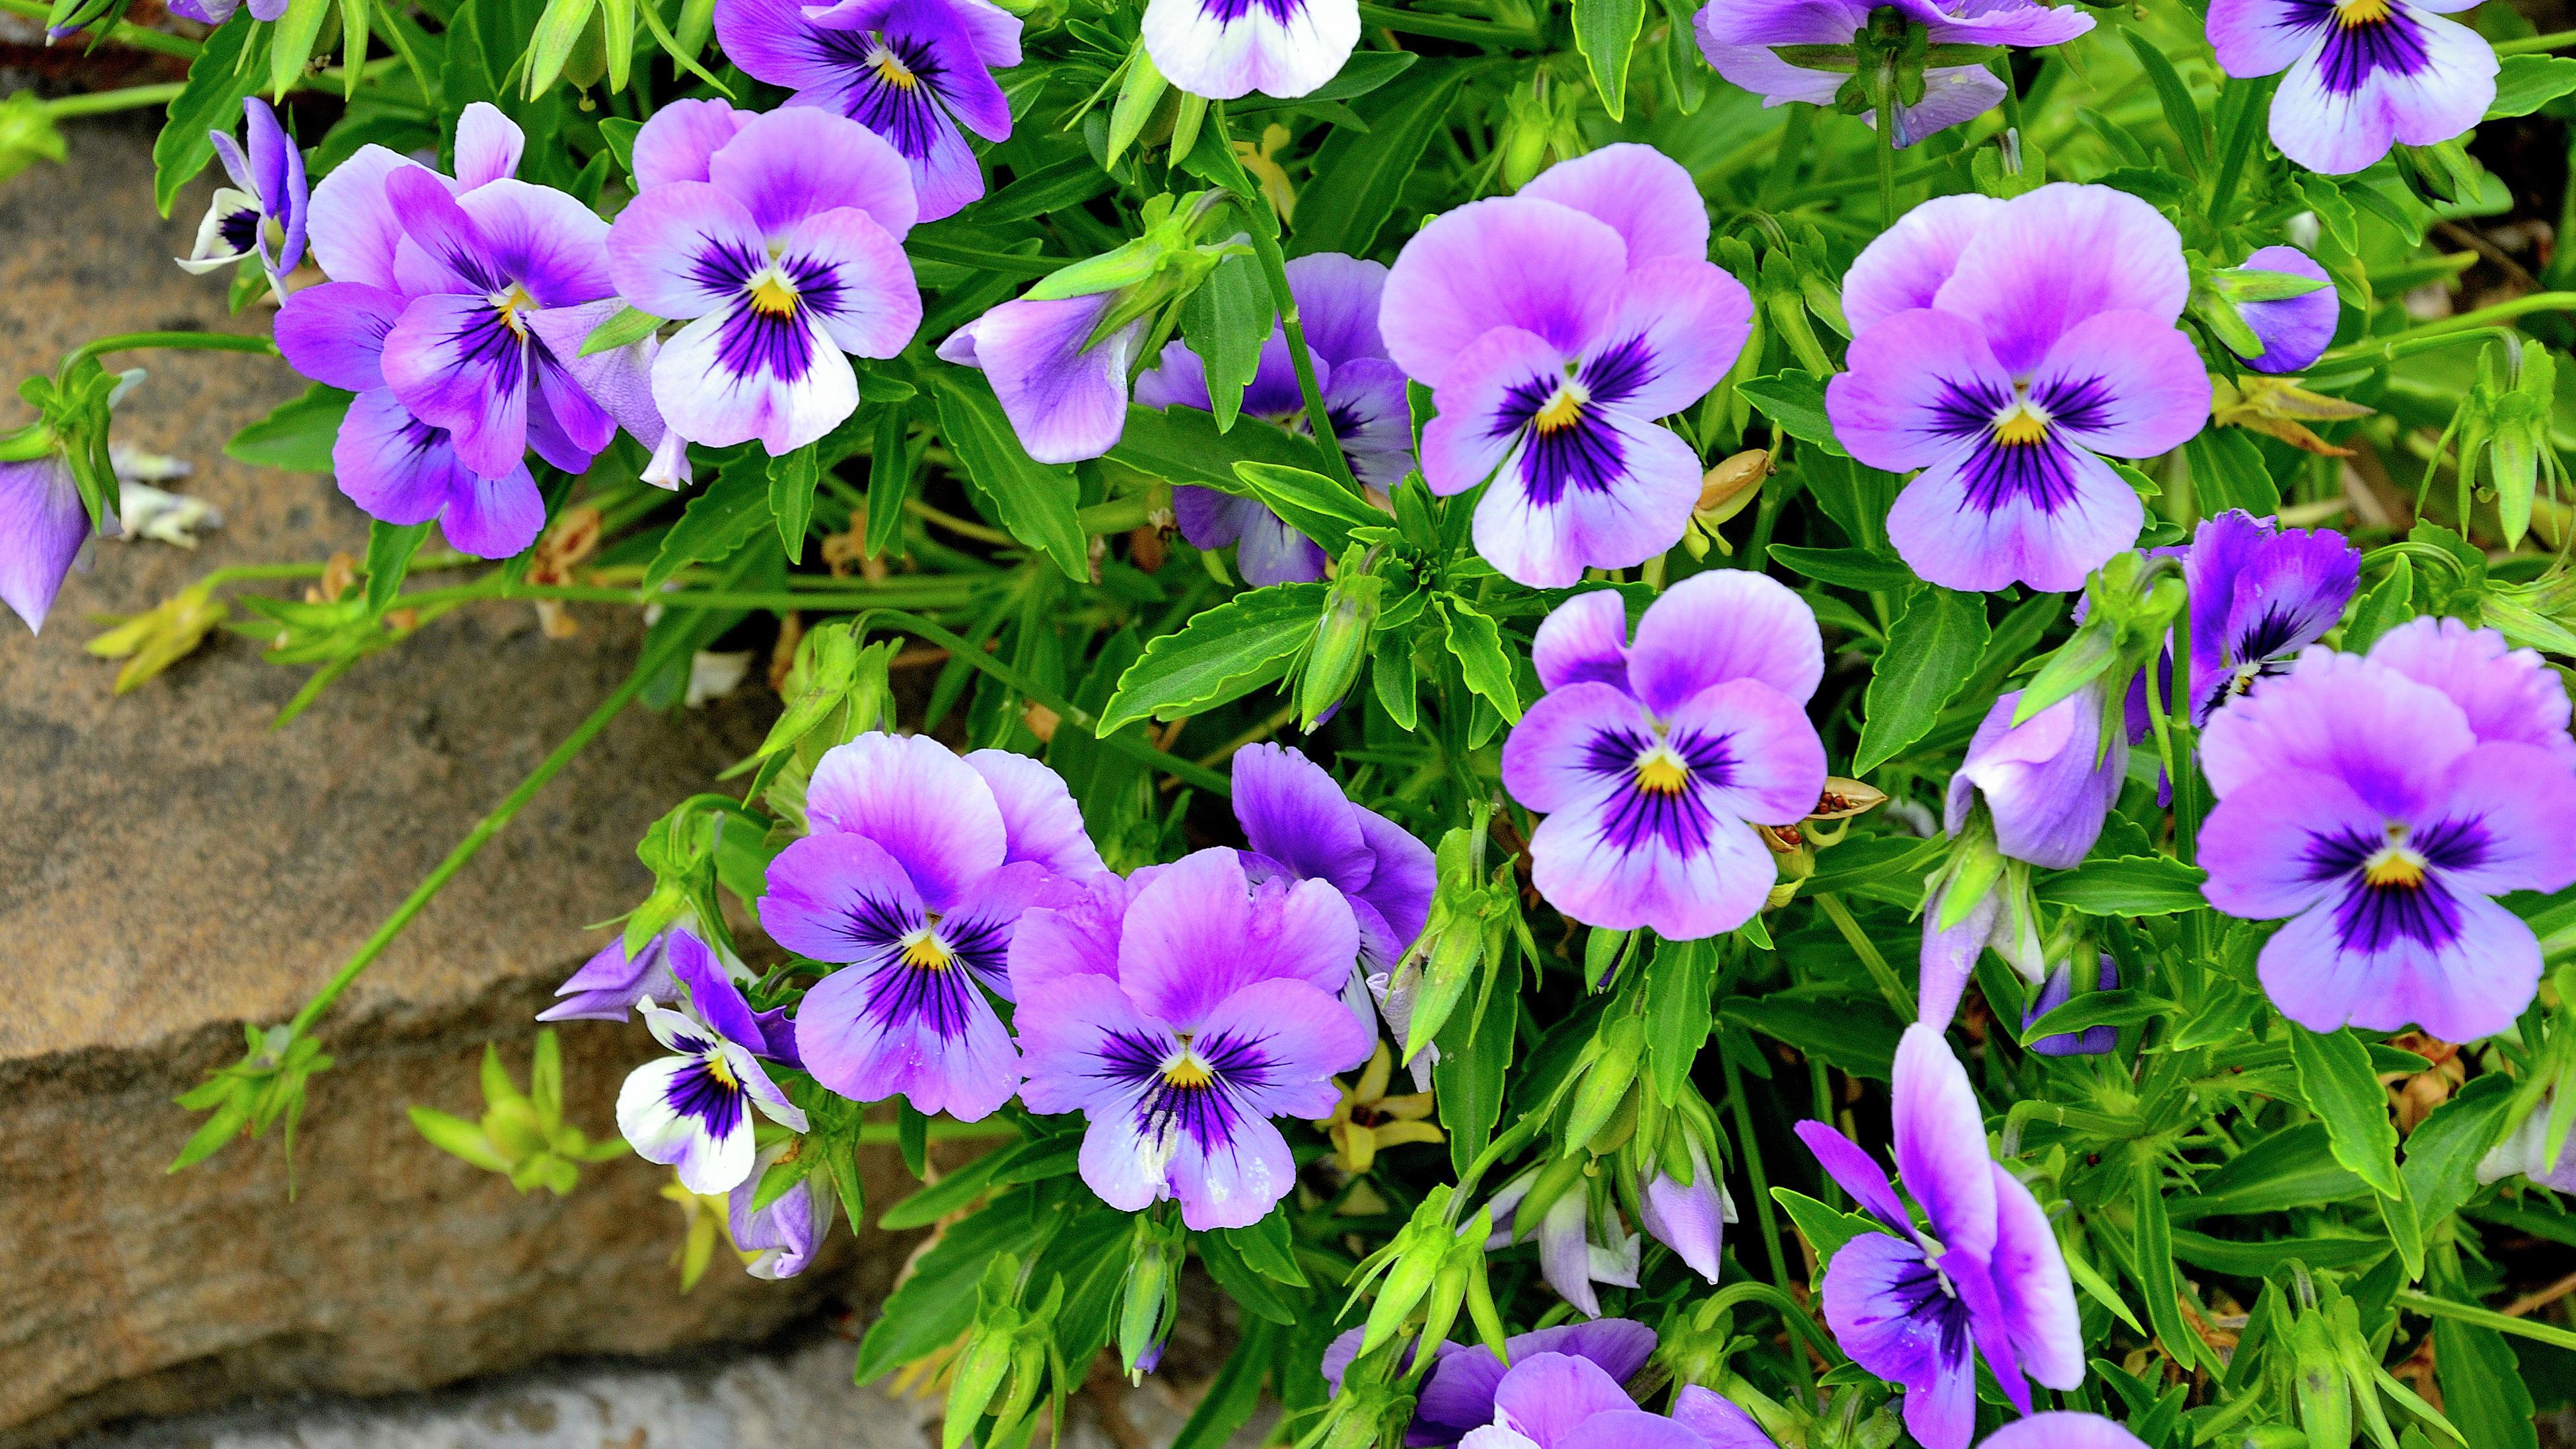 How To Plant And Grow Pansies - Bunnings Australia